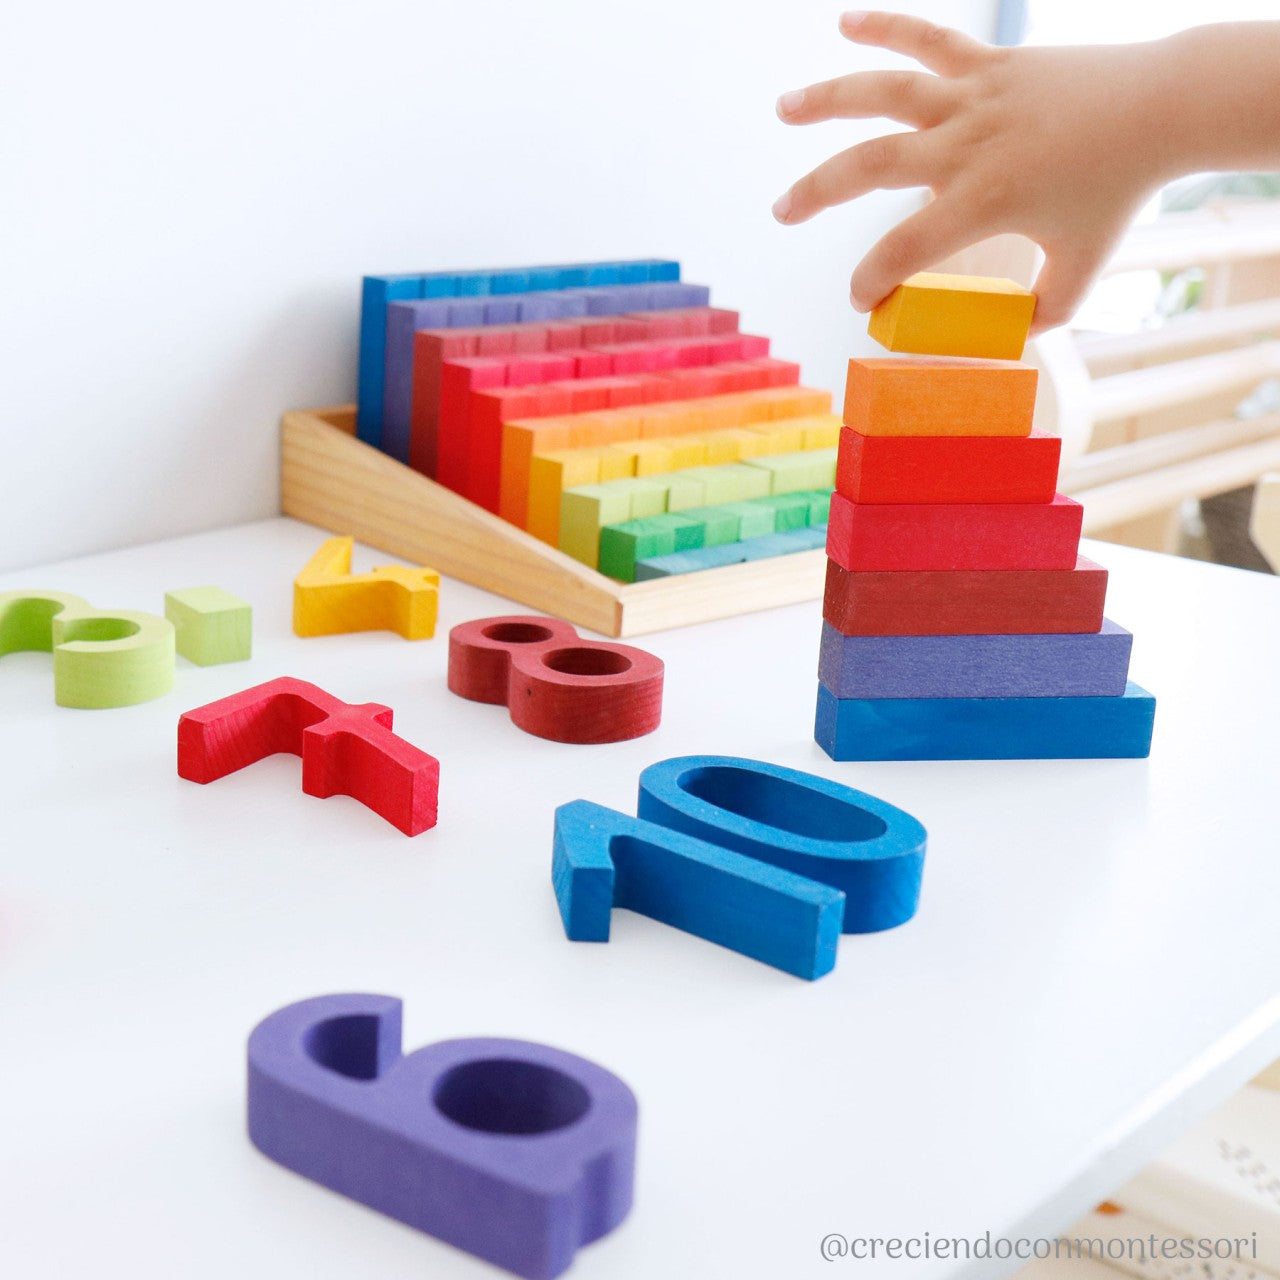 Small Stepped Counting Blocks | Building Set | Wooden Toys for Kids | Open-Ended Play